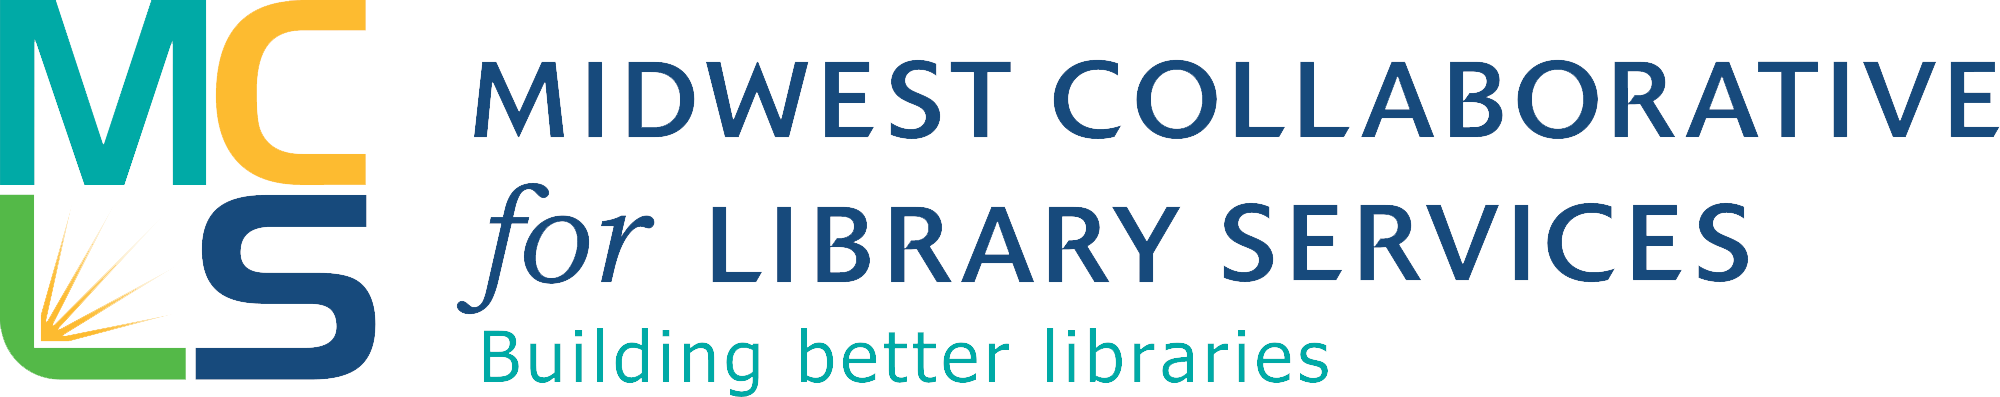 Midwest Collaborative for Library Services